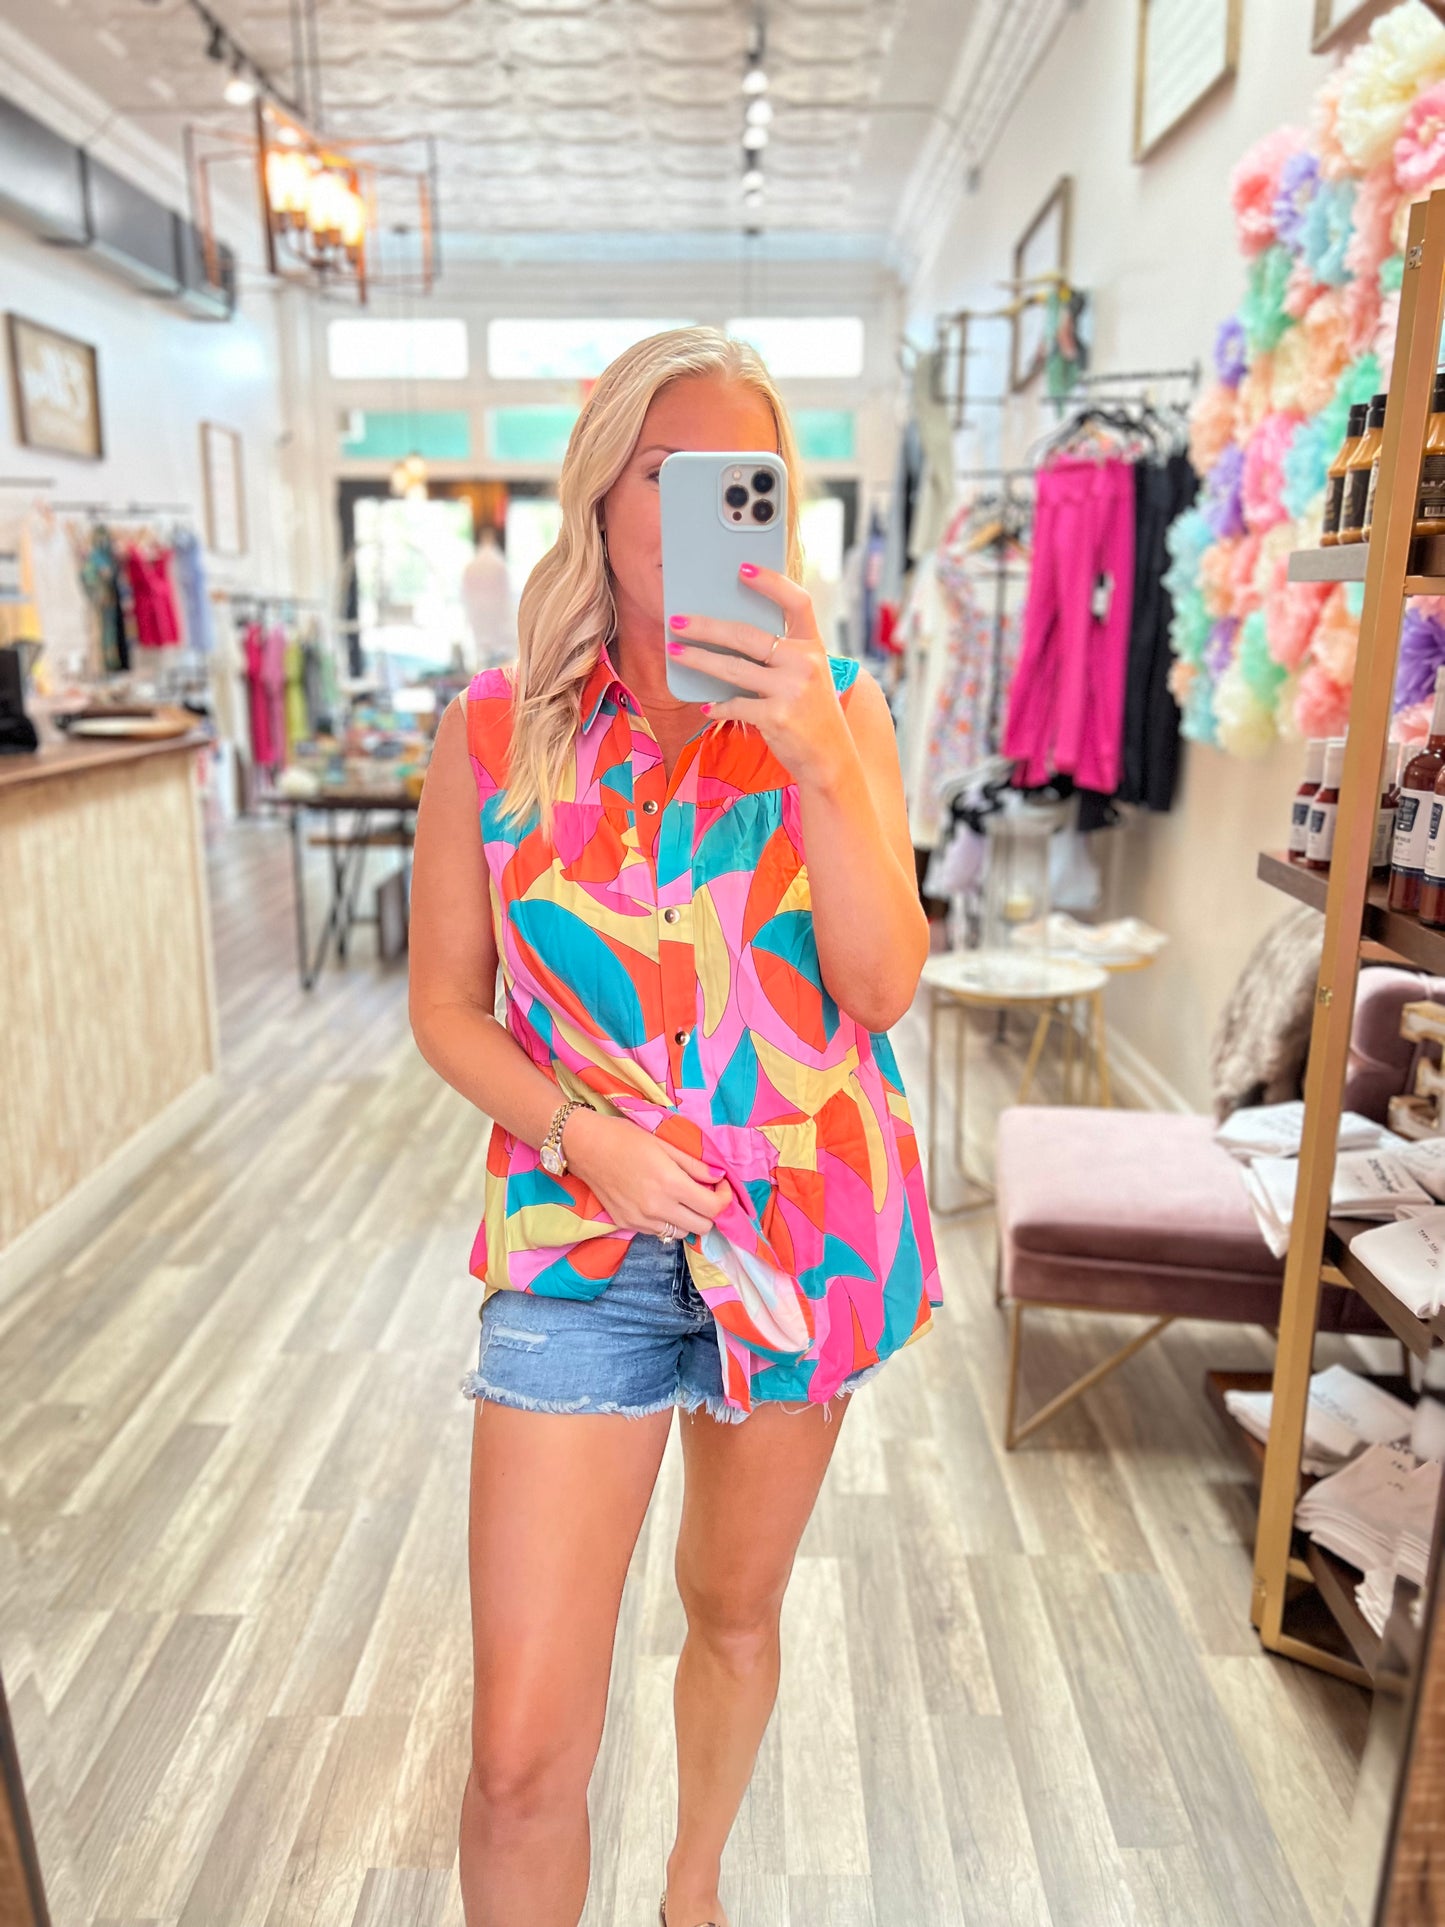 Abstract Colorful Top